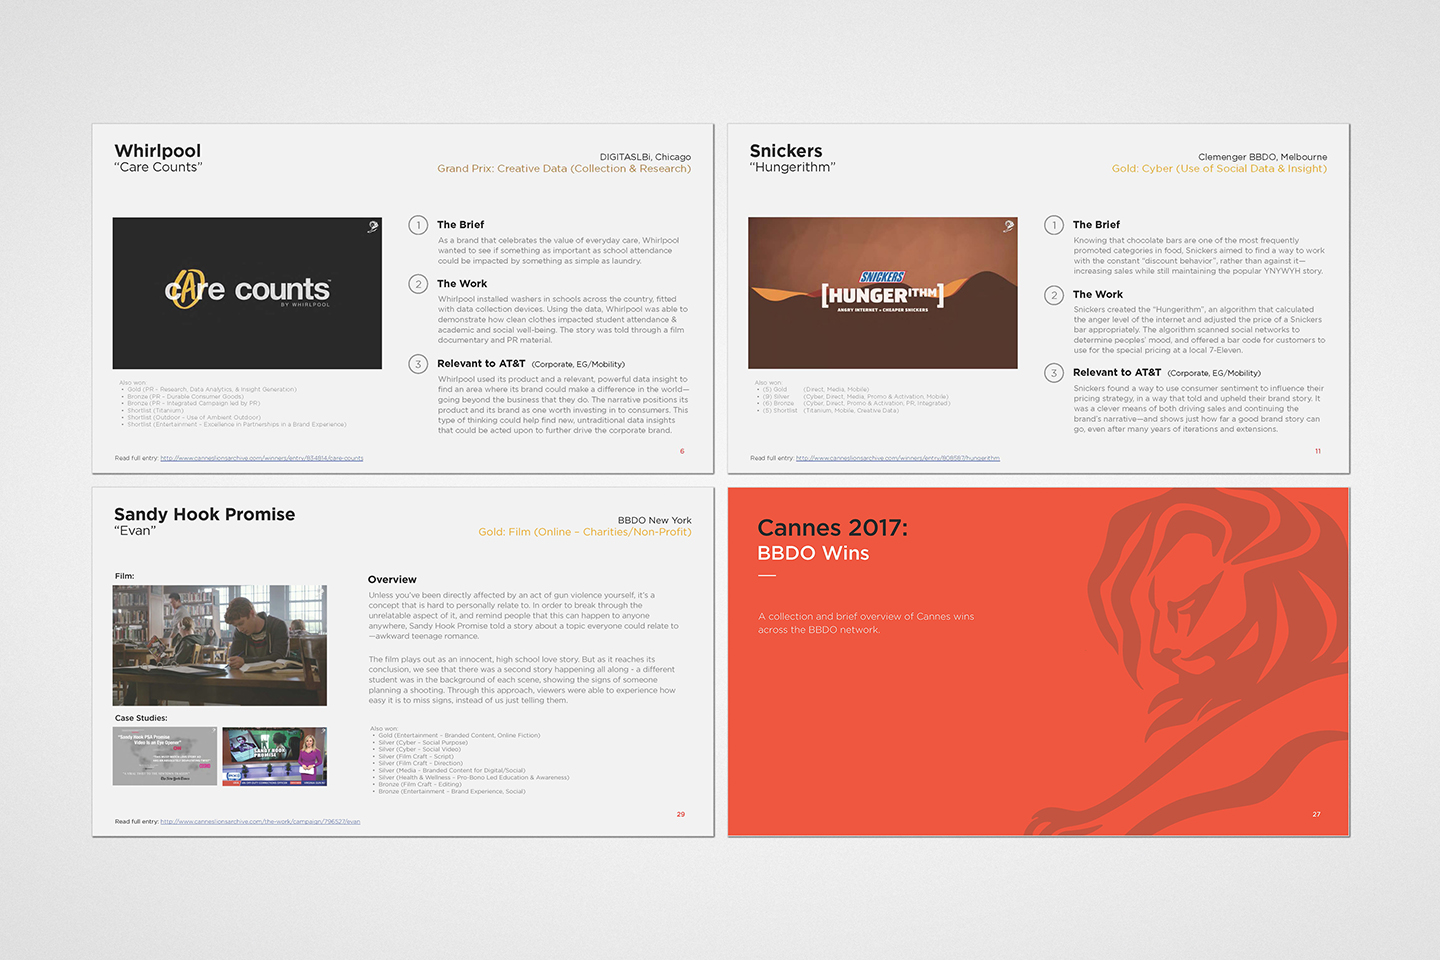 CannesLions_Overview_Layout-2-sm.jpg